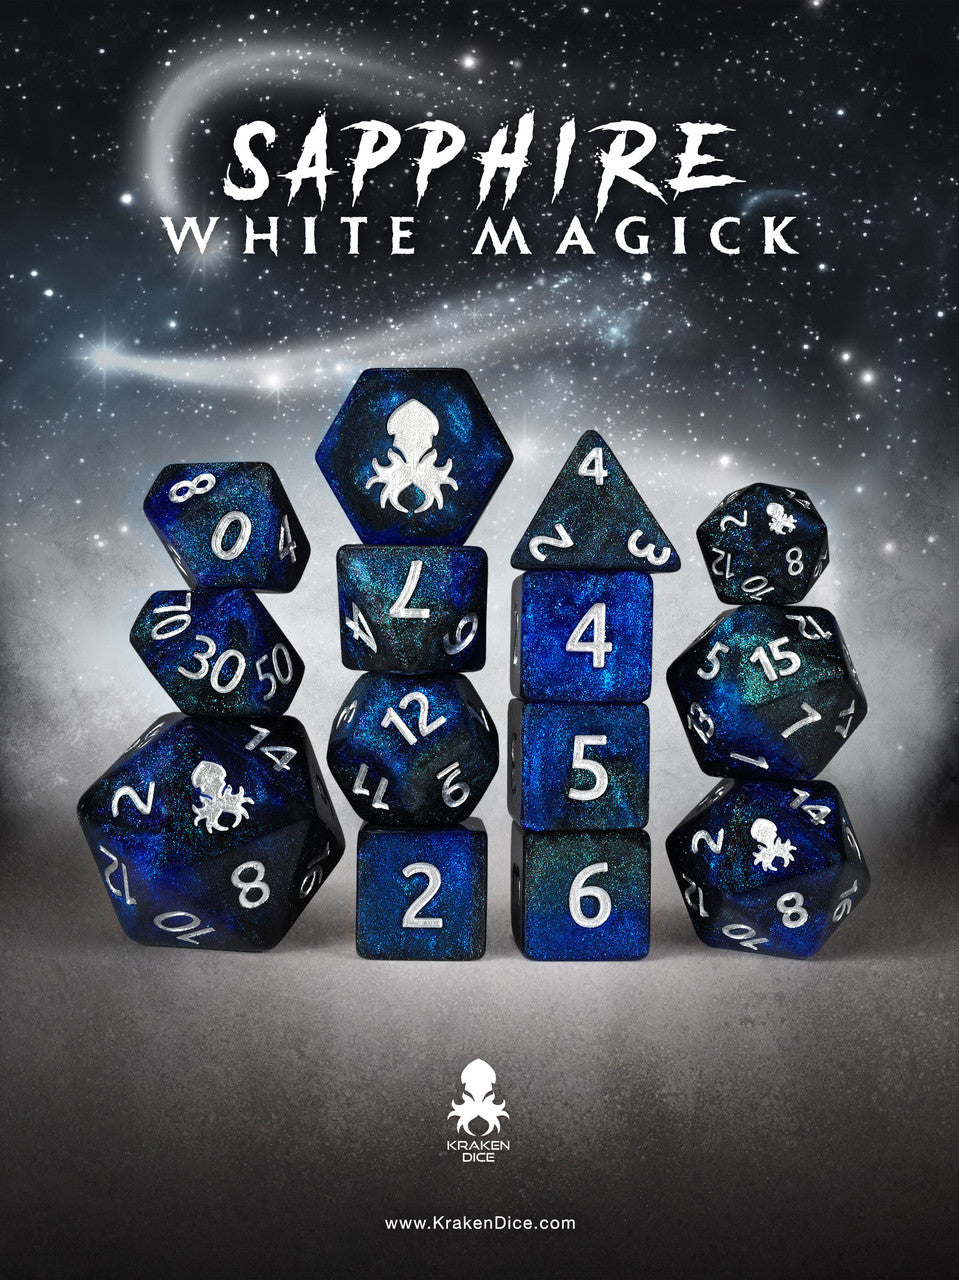 Sapphire White Magick 14pc Dice Set inked in Silver